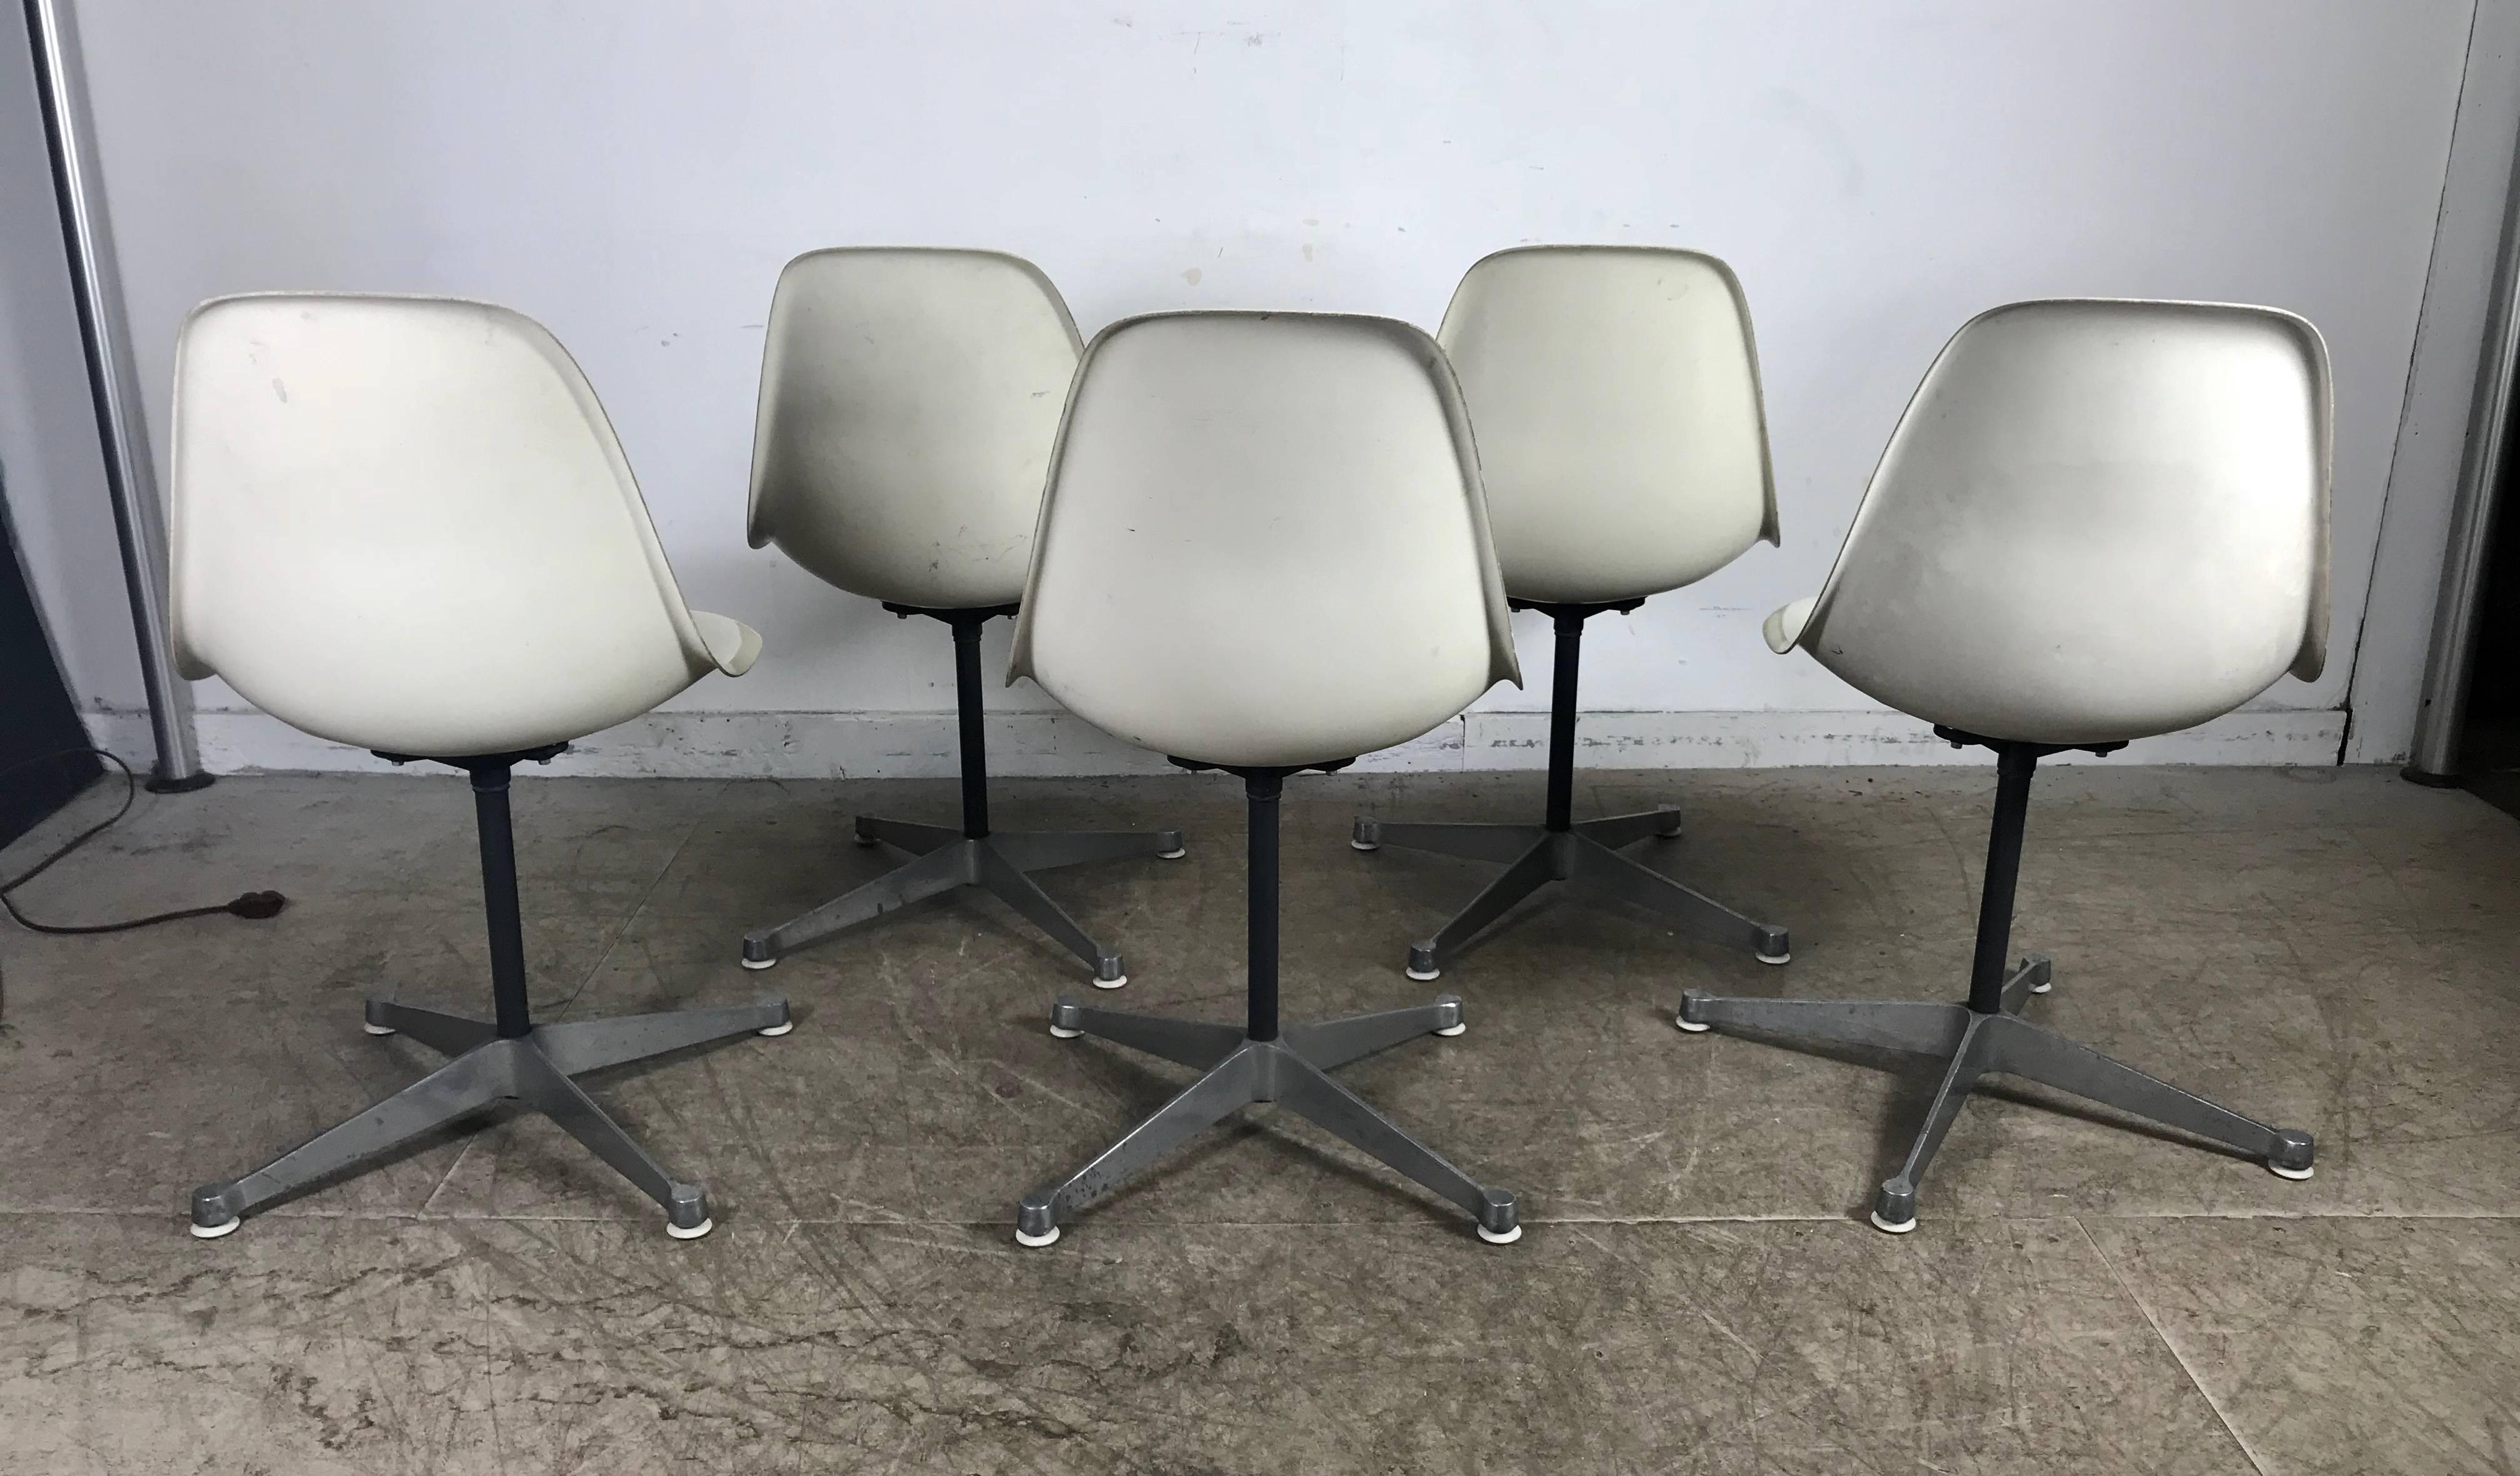 Six Classic Mid-Century Modern fiberglass swivel side shell chairs designed by Charles and Ray Eames, manufactured by Herman Miller. Remarkable condition for there age, early example, beautiful white fiberglass side shells atop cast aluminum four